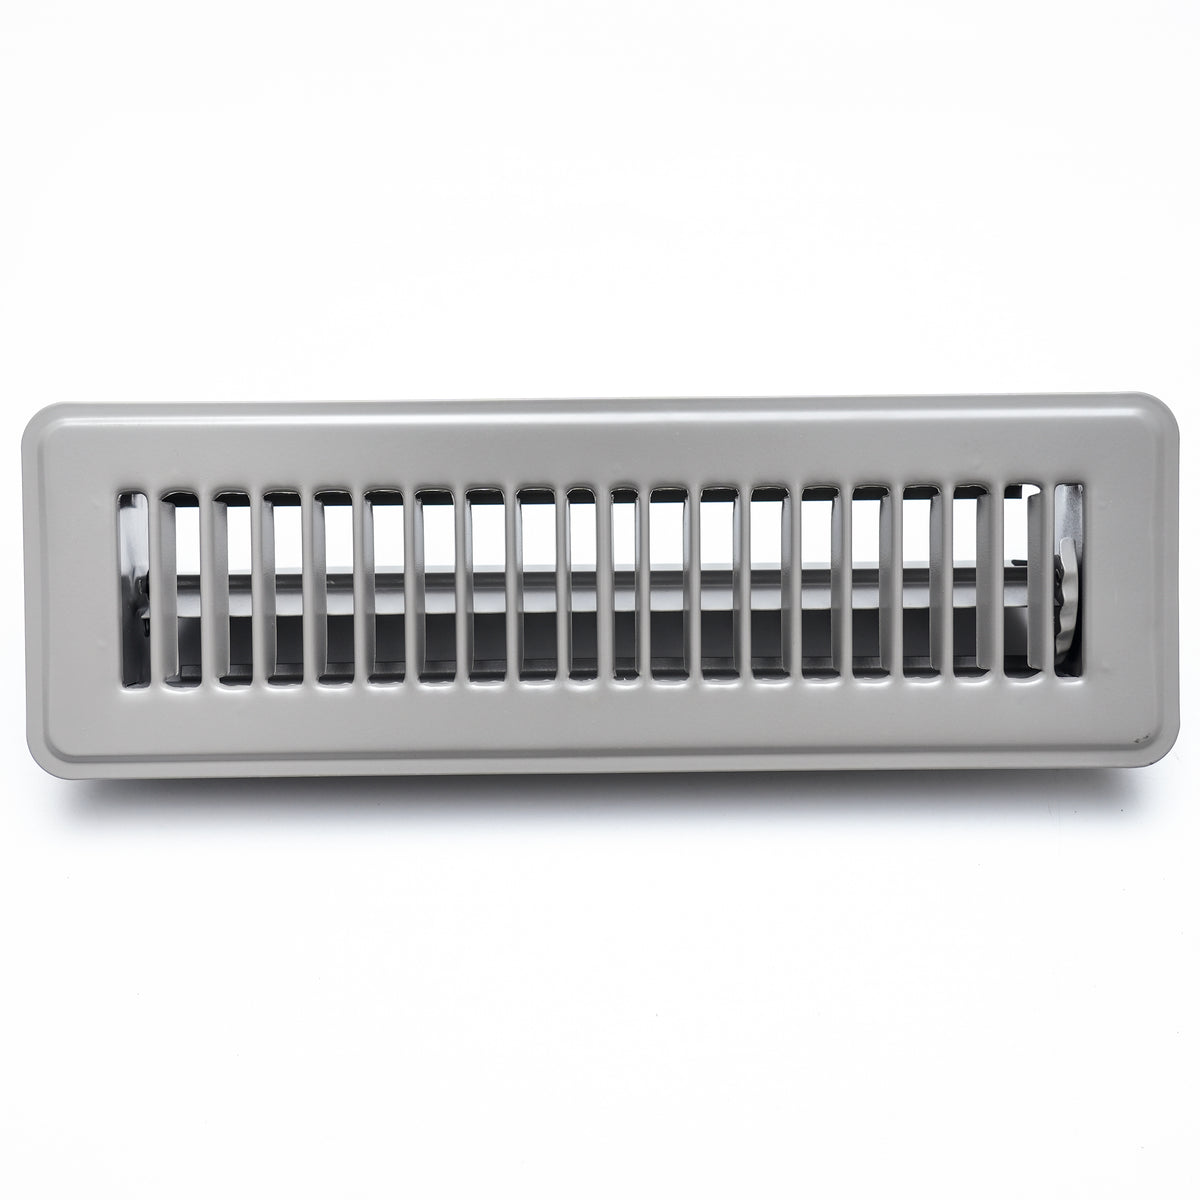 airgrilles 2" x 10" floor register with louvered design   heavy duty walkable design with damper   floor vent grille   easy to adjust air supply lever   gray hnd-flg-gr-2x10  - 1